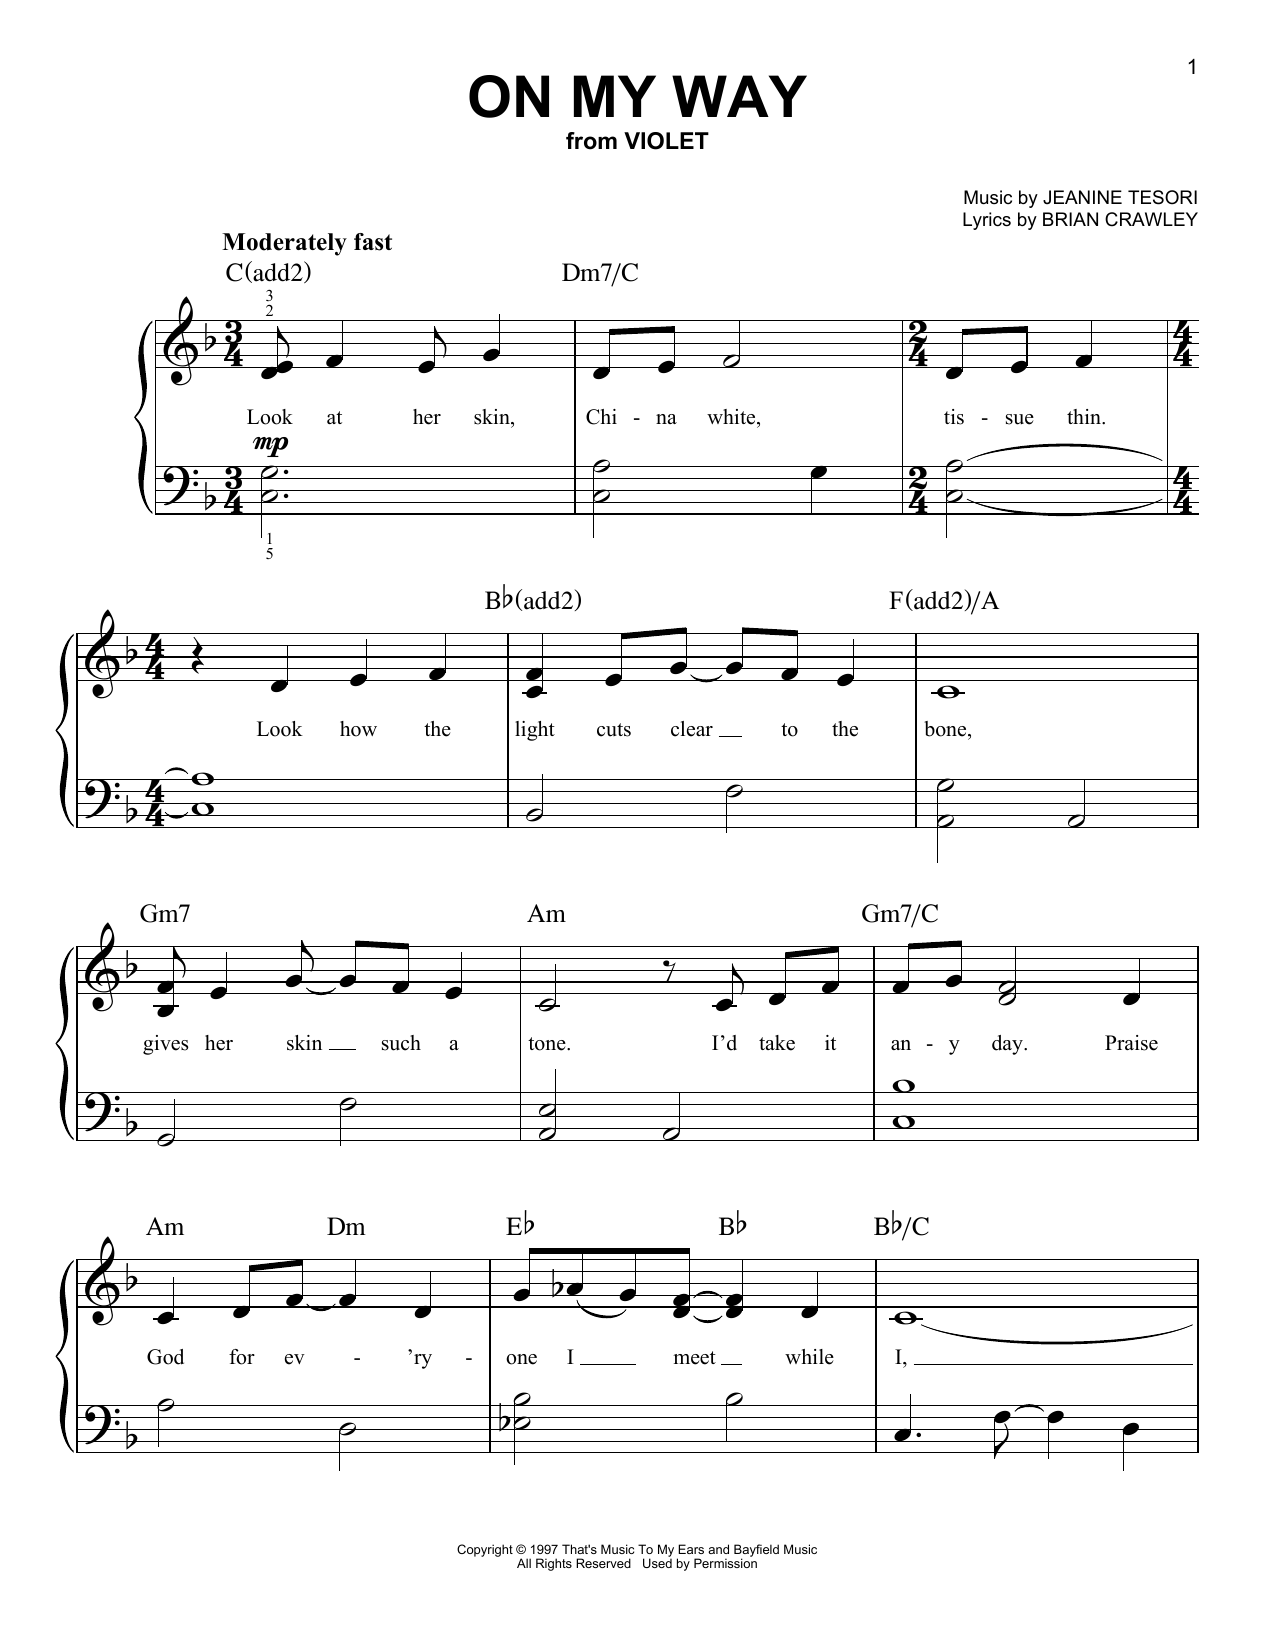 Download Jeanine Tesori On My Way (from Violet) Sheet Music